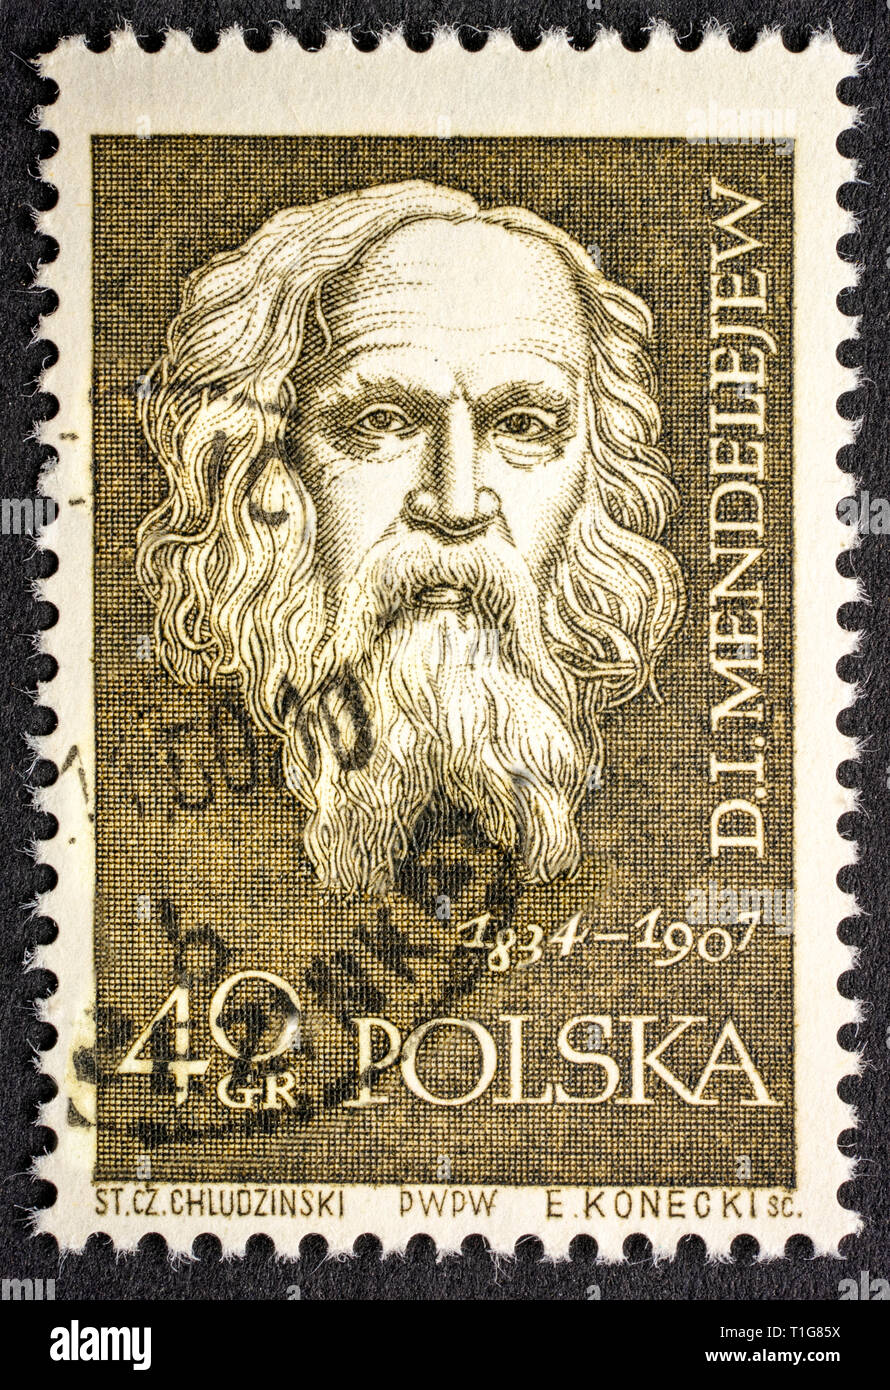 Dmitri Mendeleev, Russian chemist and inventor,  portrait on a vintage, canceled post stamp from Poland (circa 1959). Stock Photo